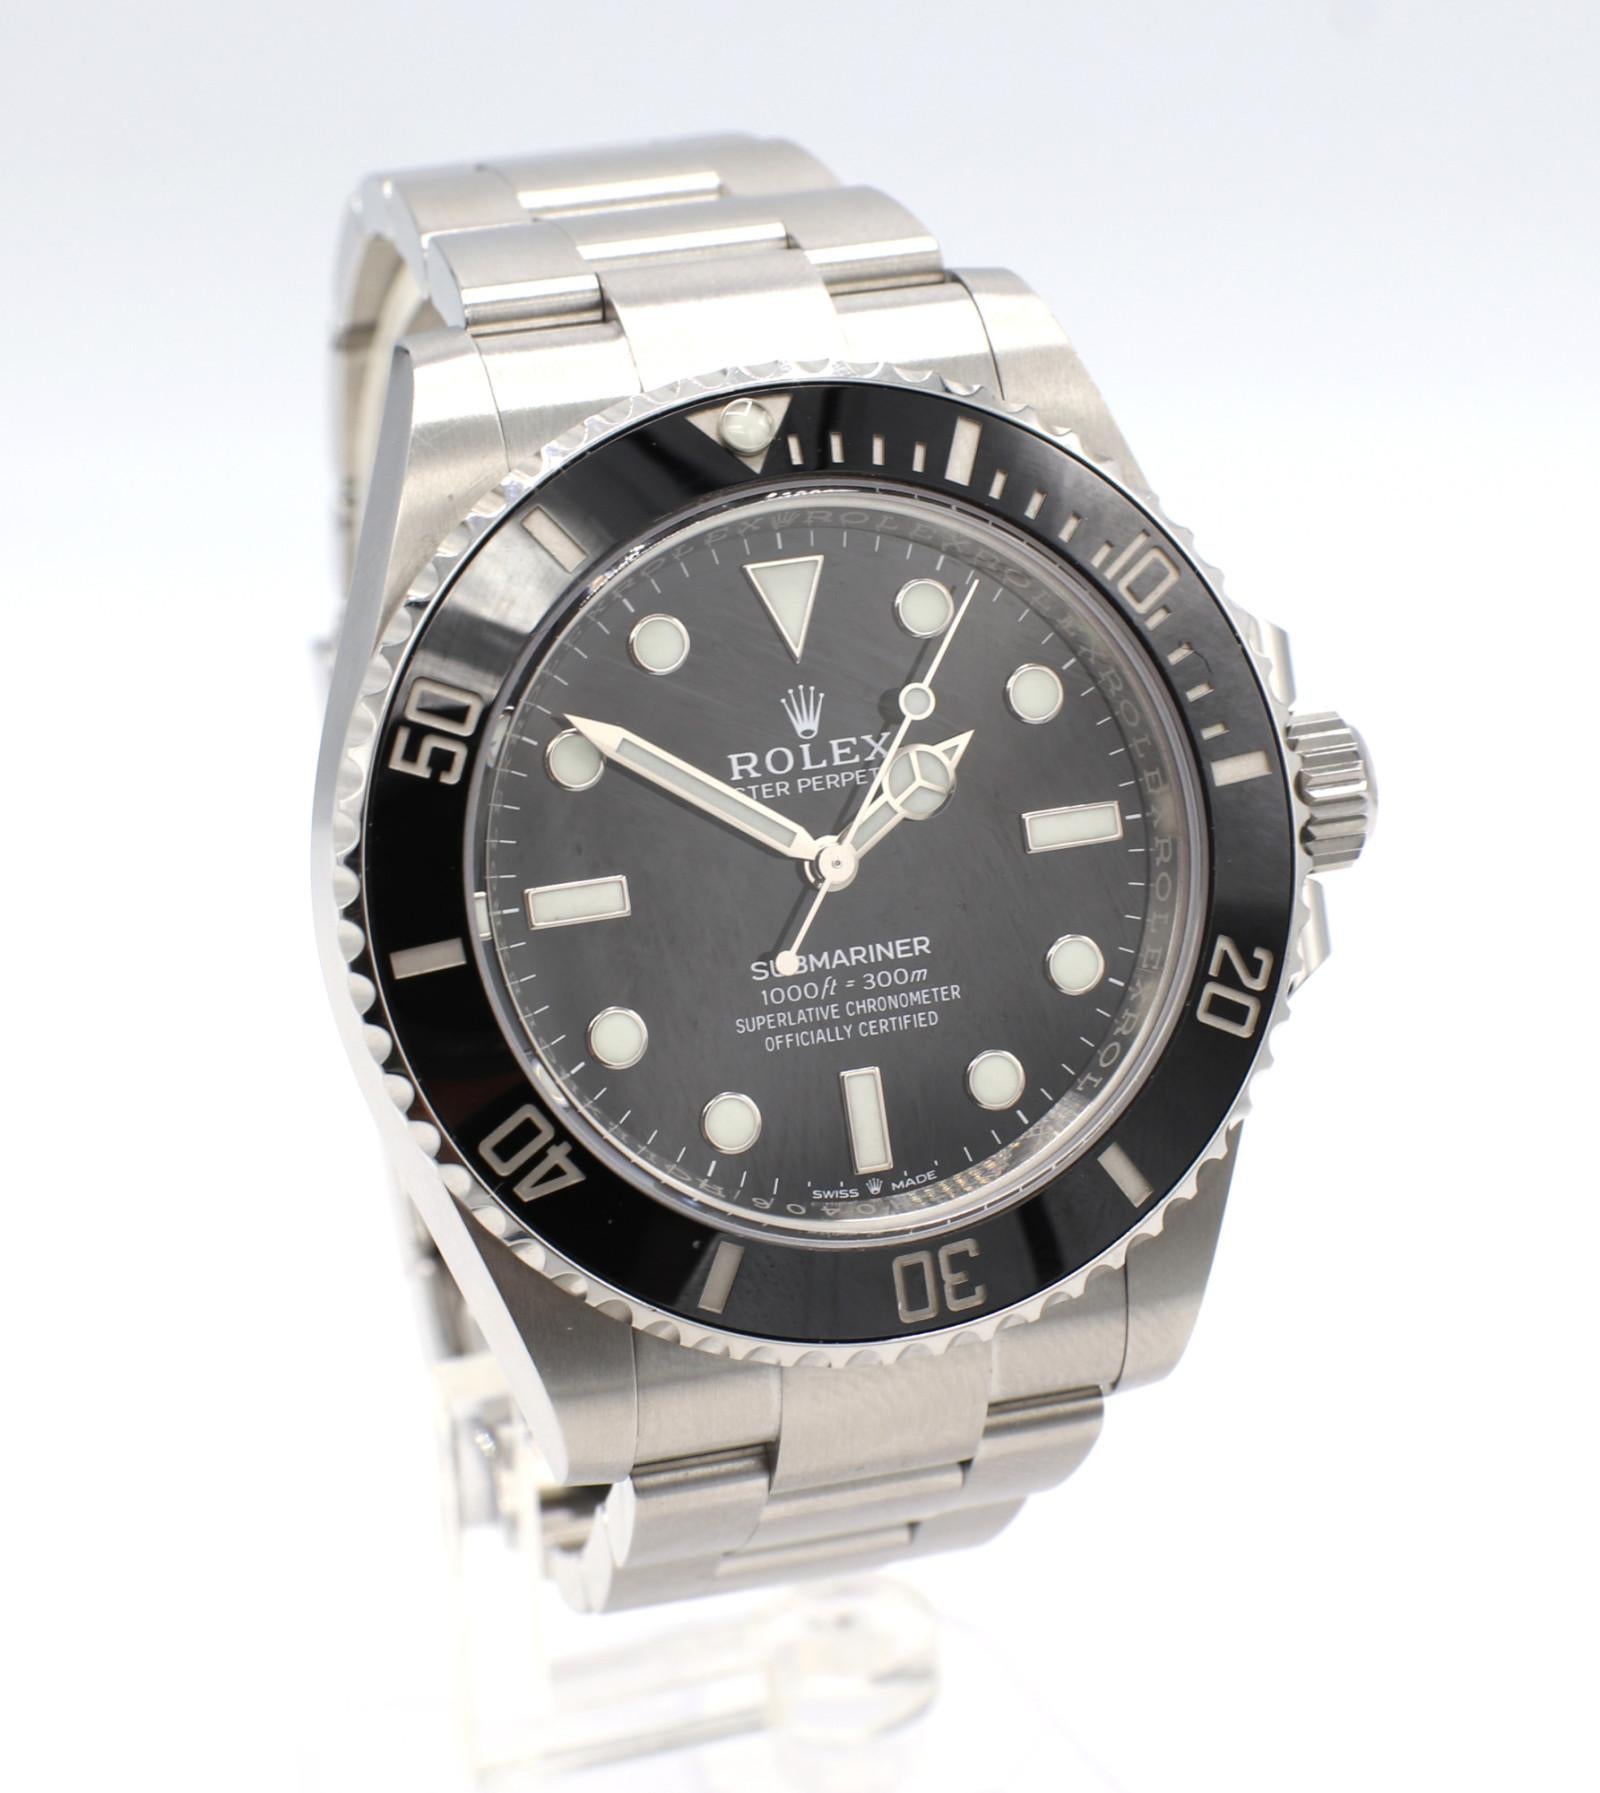 Rolex Submariner Black Stainless Steel 124060 No Date Watch
Model: 124060
Serial: P77H**** (Card dated 2021)
Case: 41mm
Bracelet: Oystersteel Oyster w/ Glidelock clasp
Metal: Stainless steel
Notes: Box, papers, full links
Movement: Automatic
Dial: